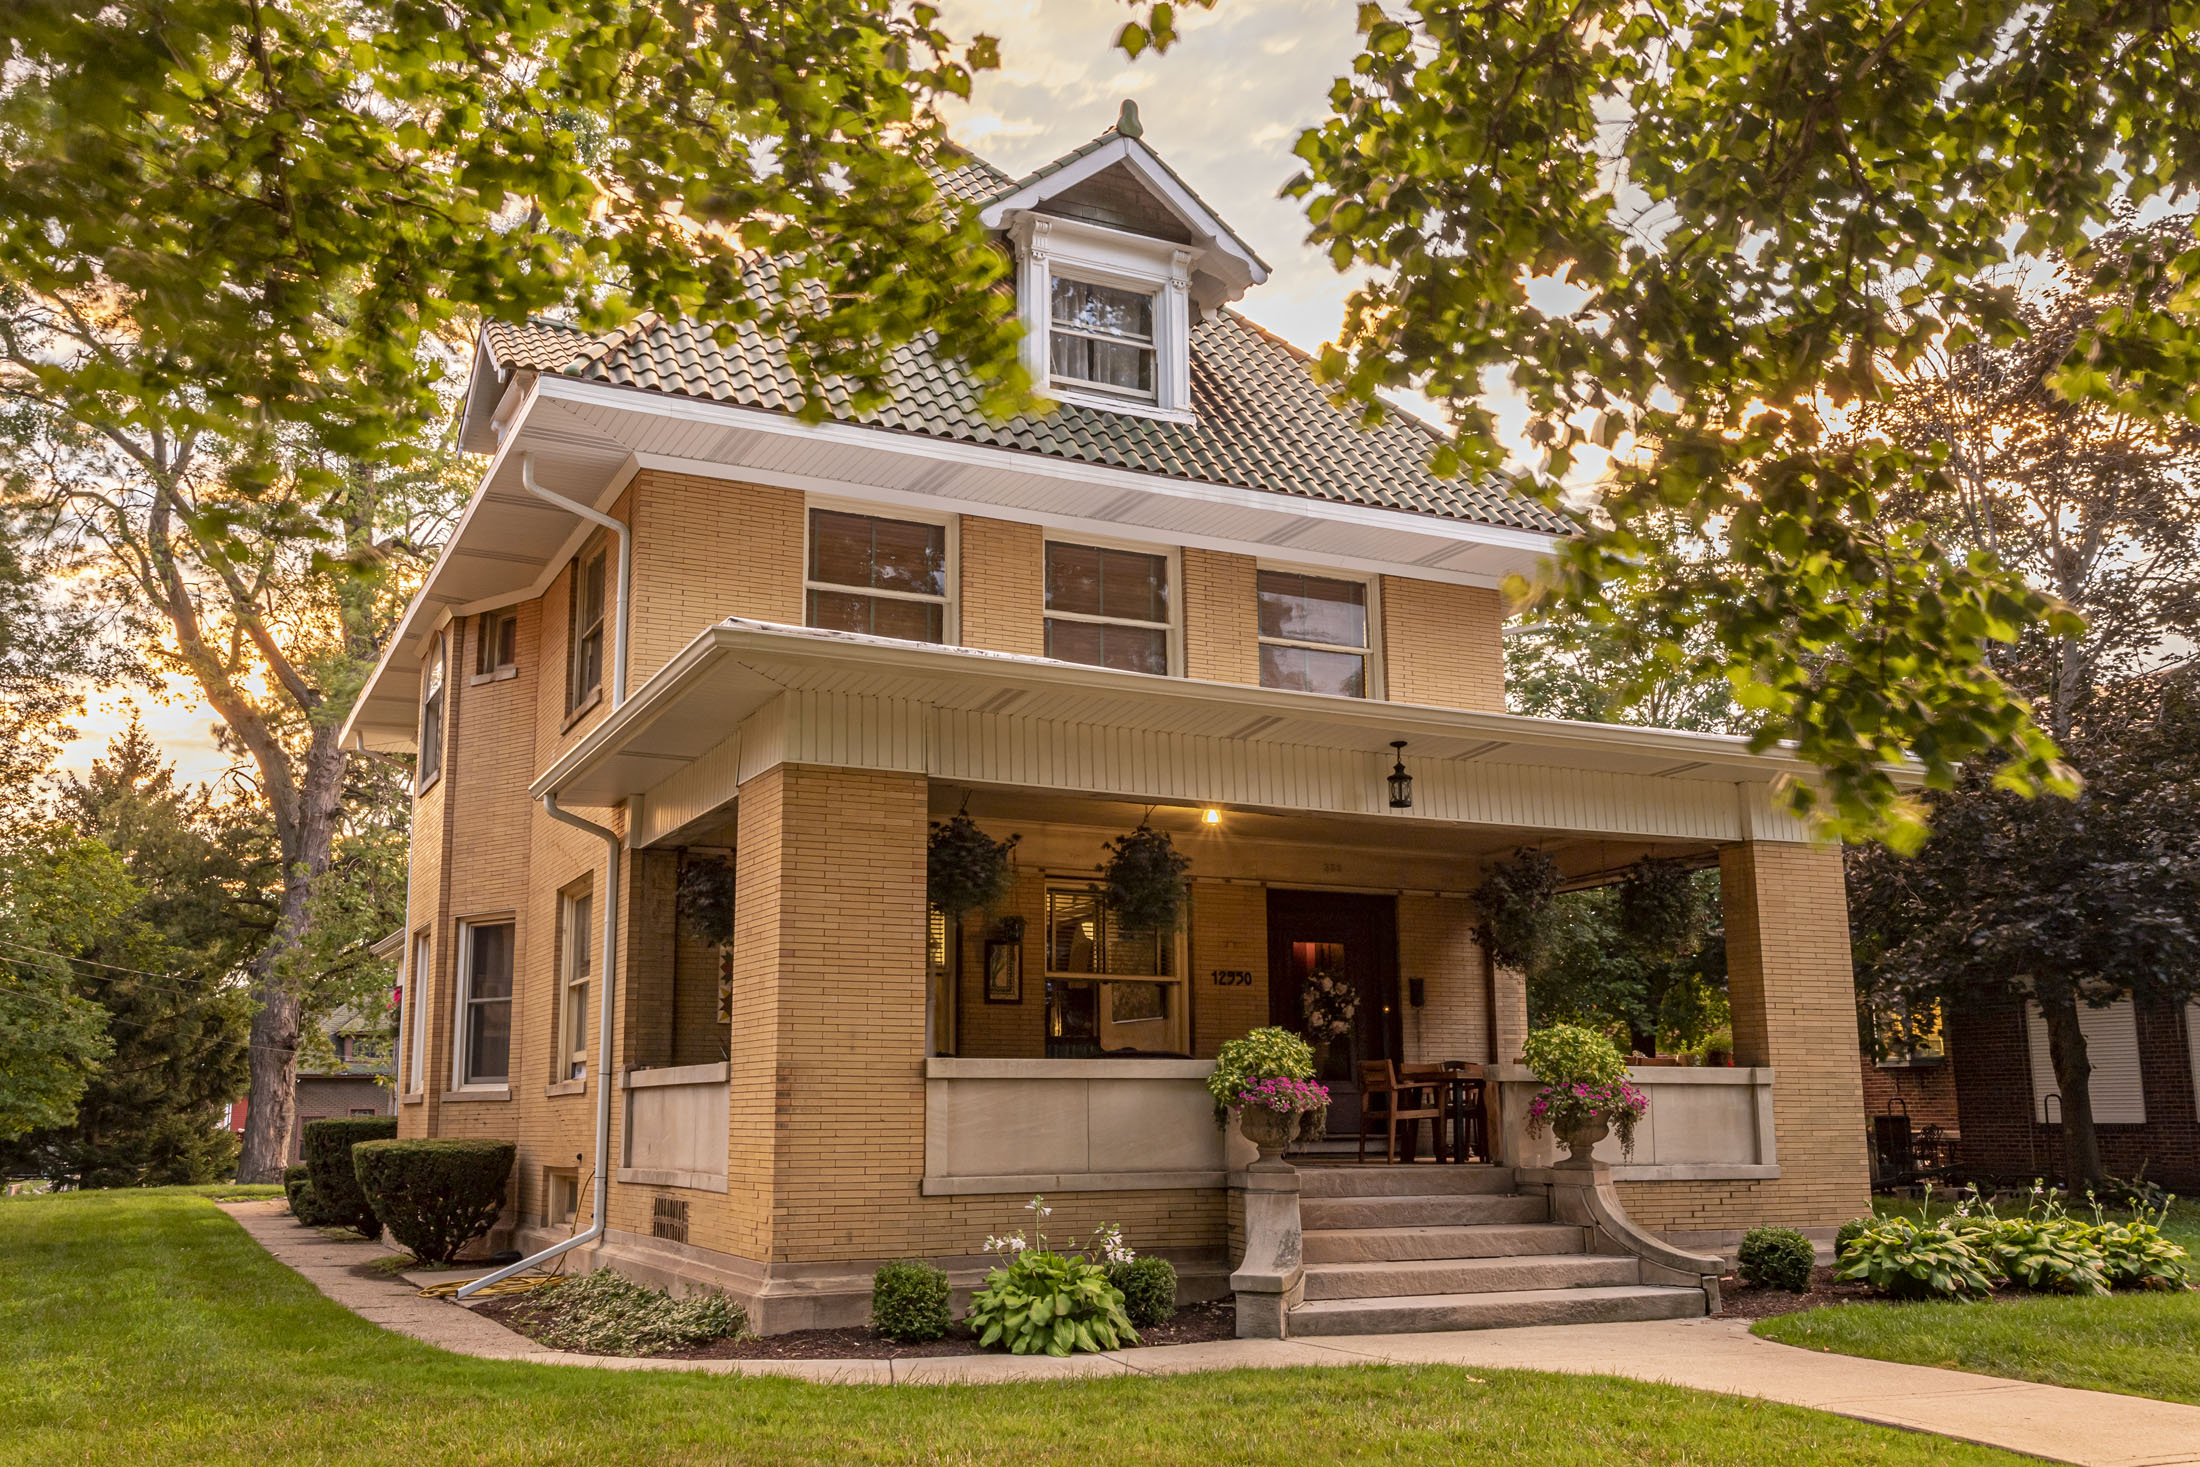 Henry & Emma Klein House – The George W. Maher Society